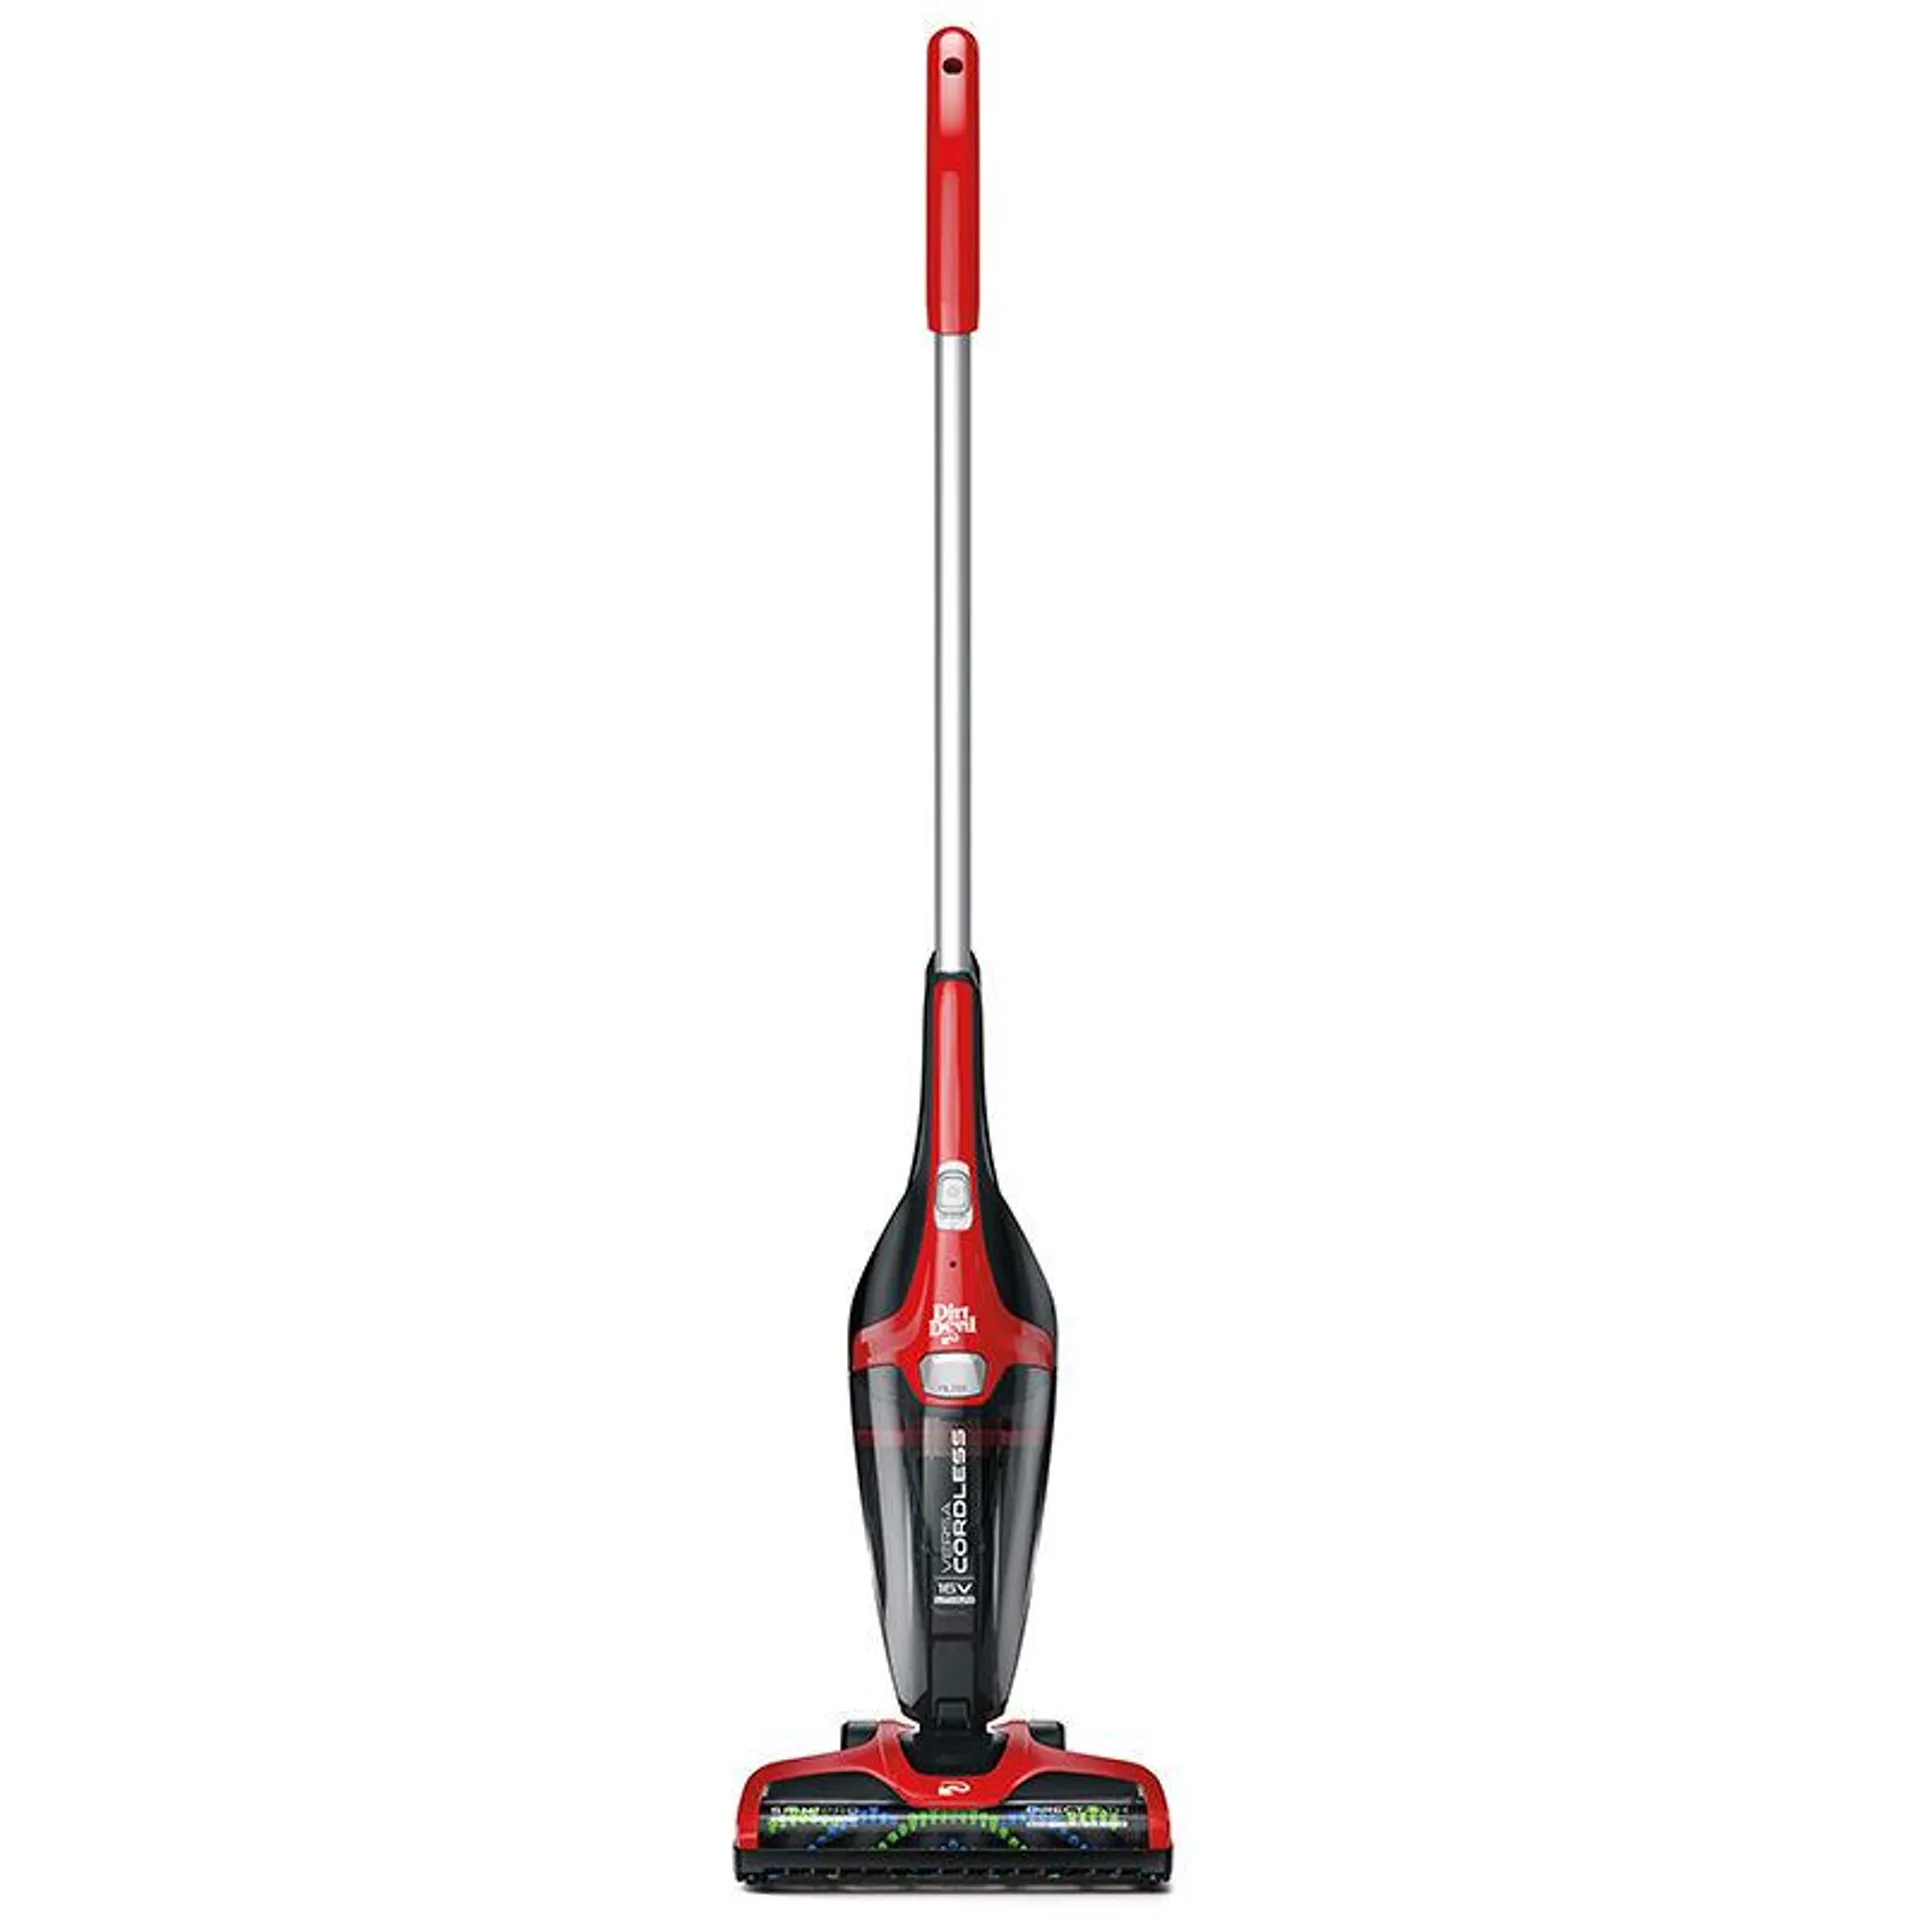 Dirt Devil Versa 3-in-1 Cordless Stick Vacuum Cleaner with Removable Hand Held Vacuum